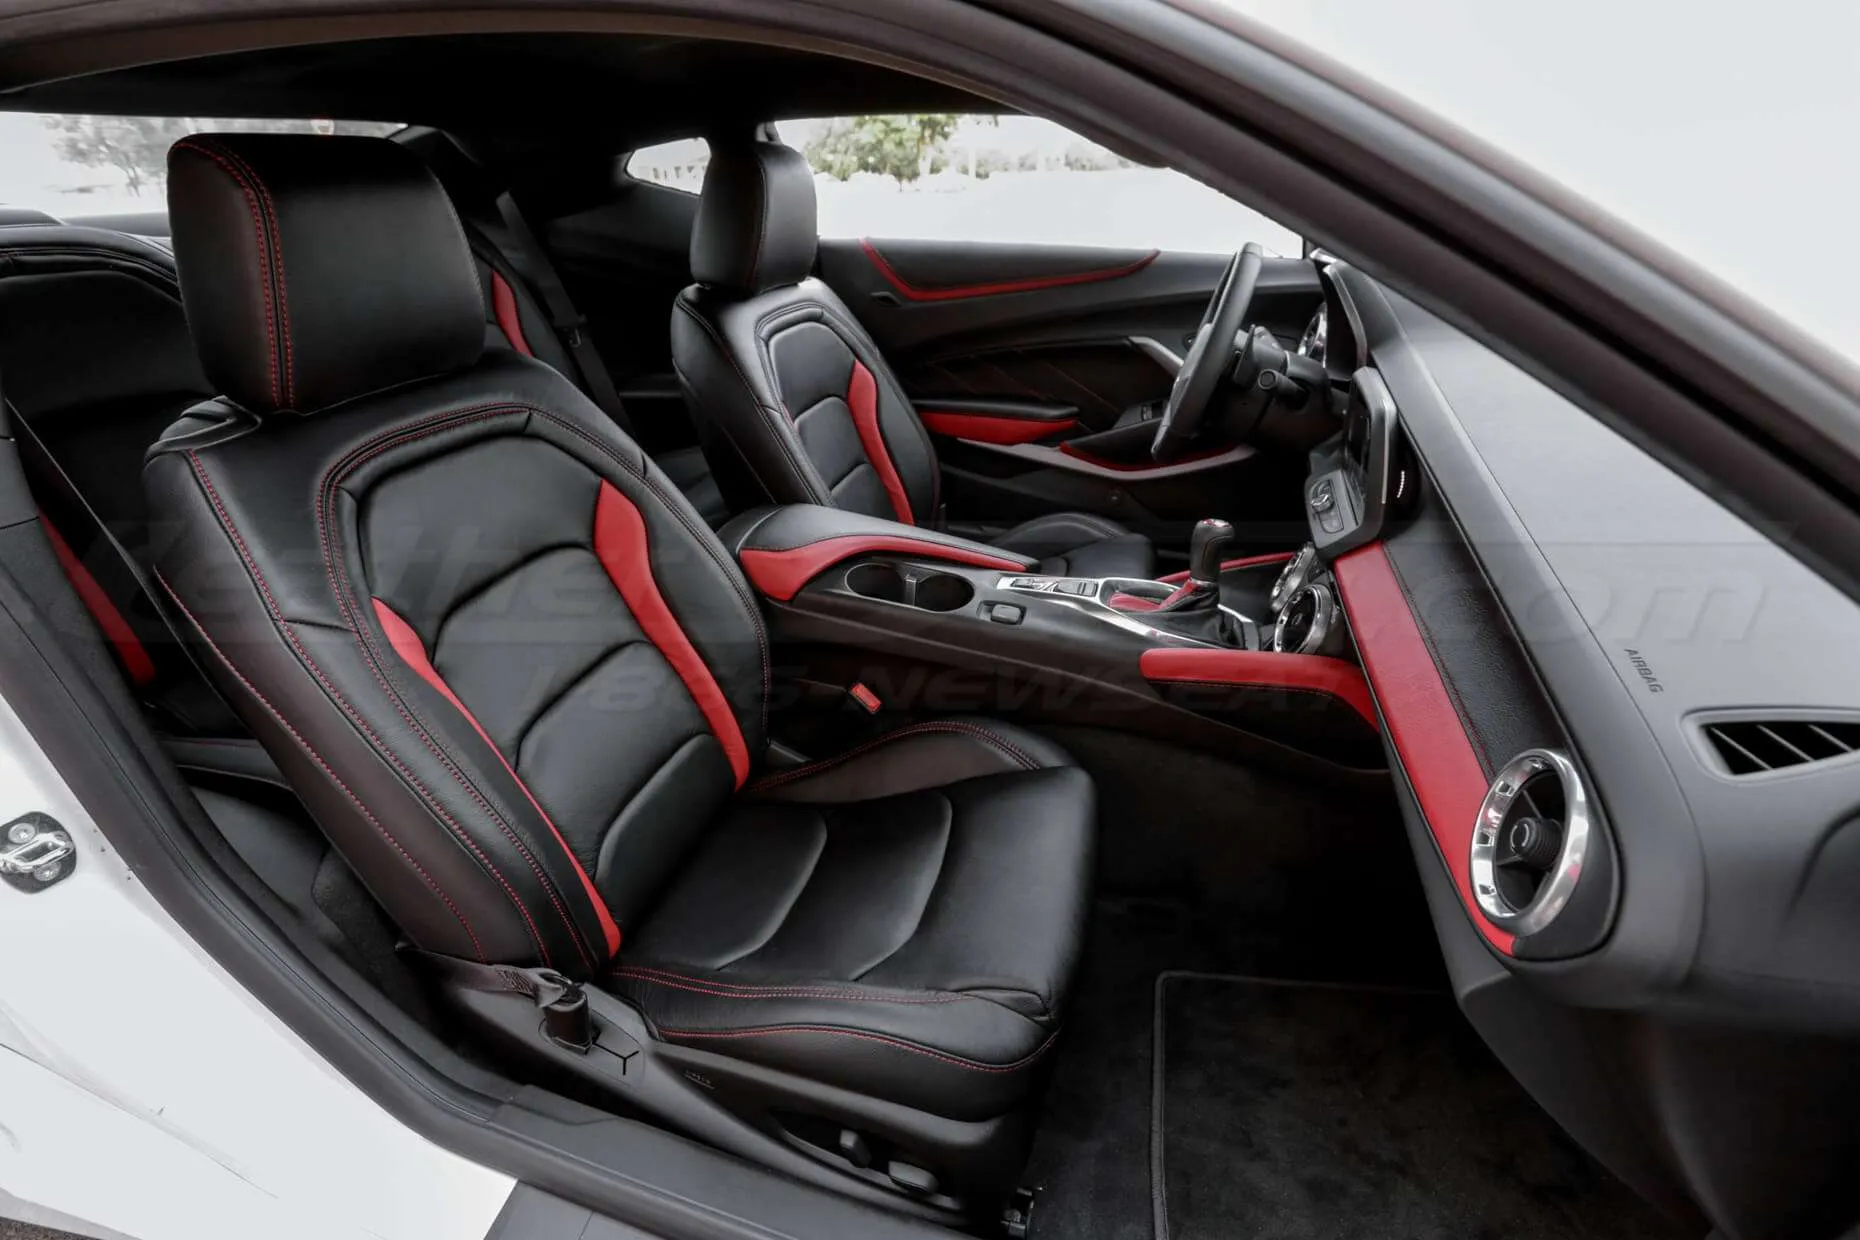 Chevrolet Camaro Leather Seats - Black with Bright Red Wings - Front passenger seat